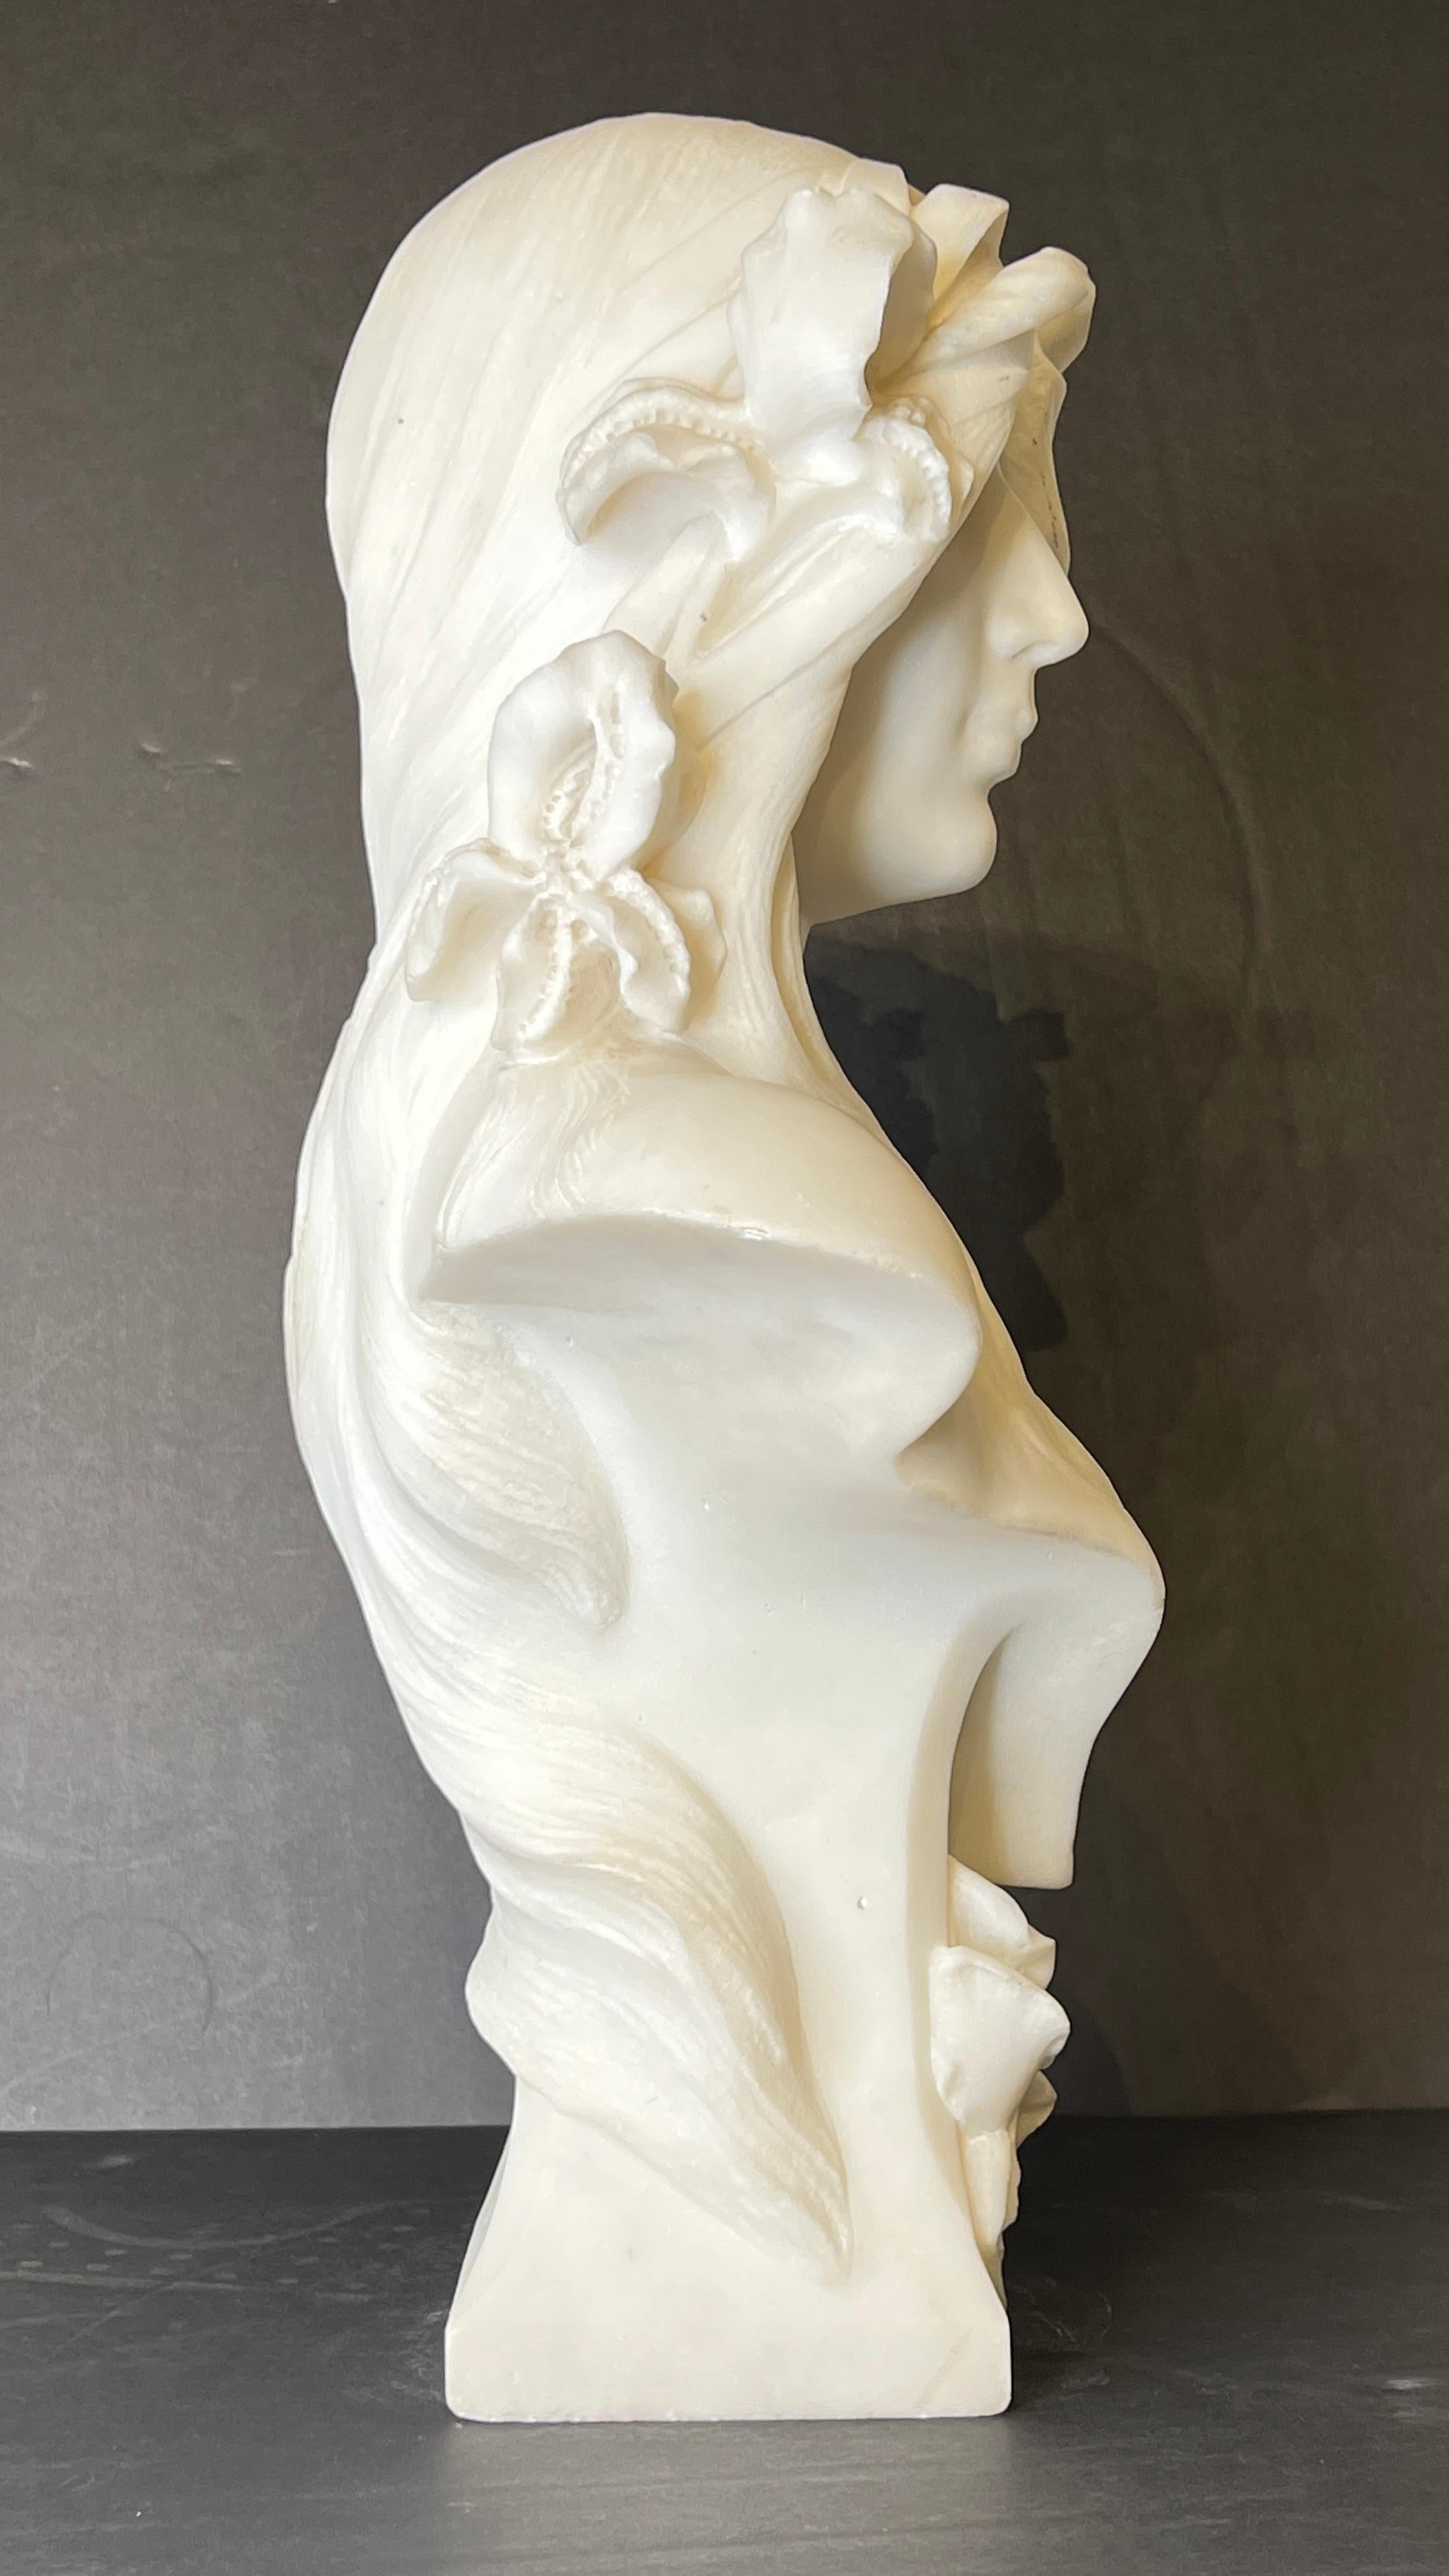 19th Century French Art Nouveau Period Marble Bust of Female Beauty For Sale